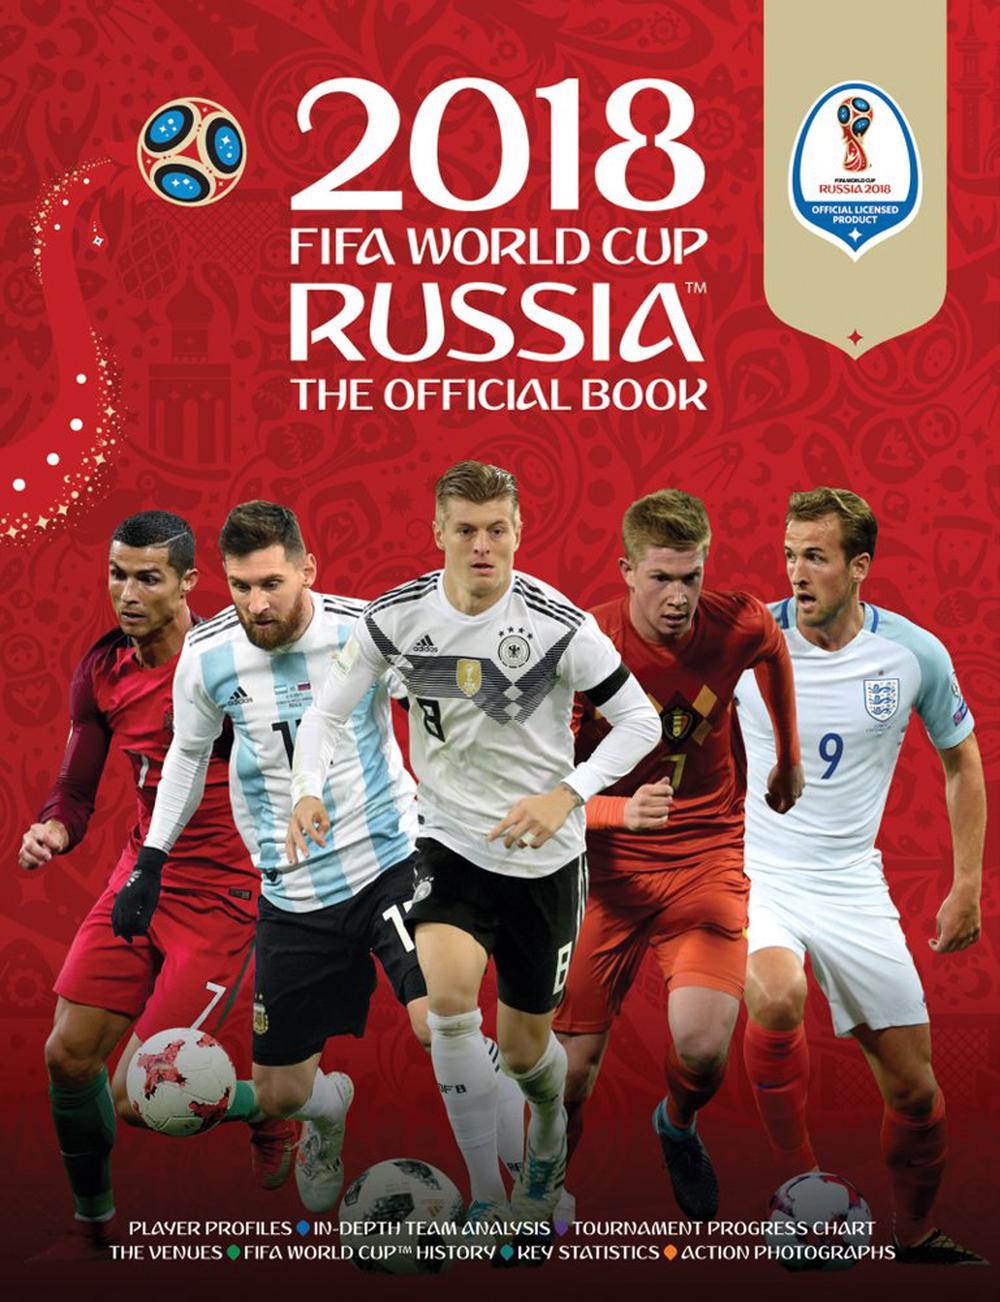 2018-fifa-world-cup-russia-the-official-book-by-keir-radnedge